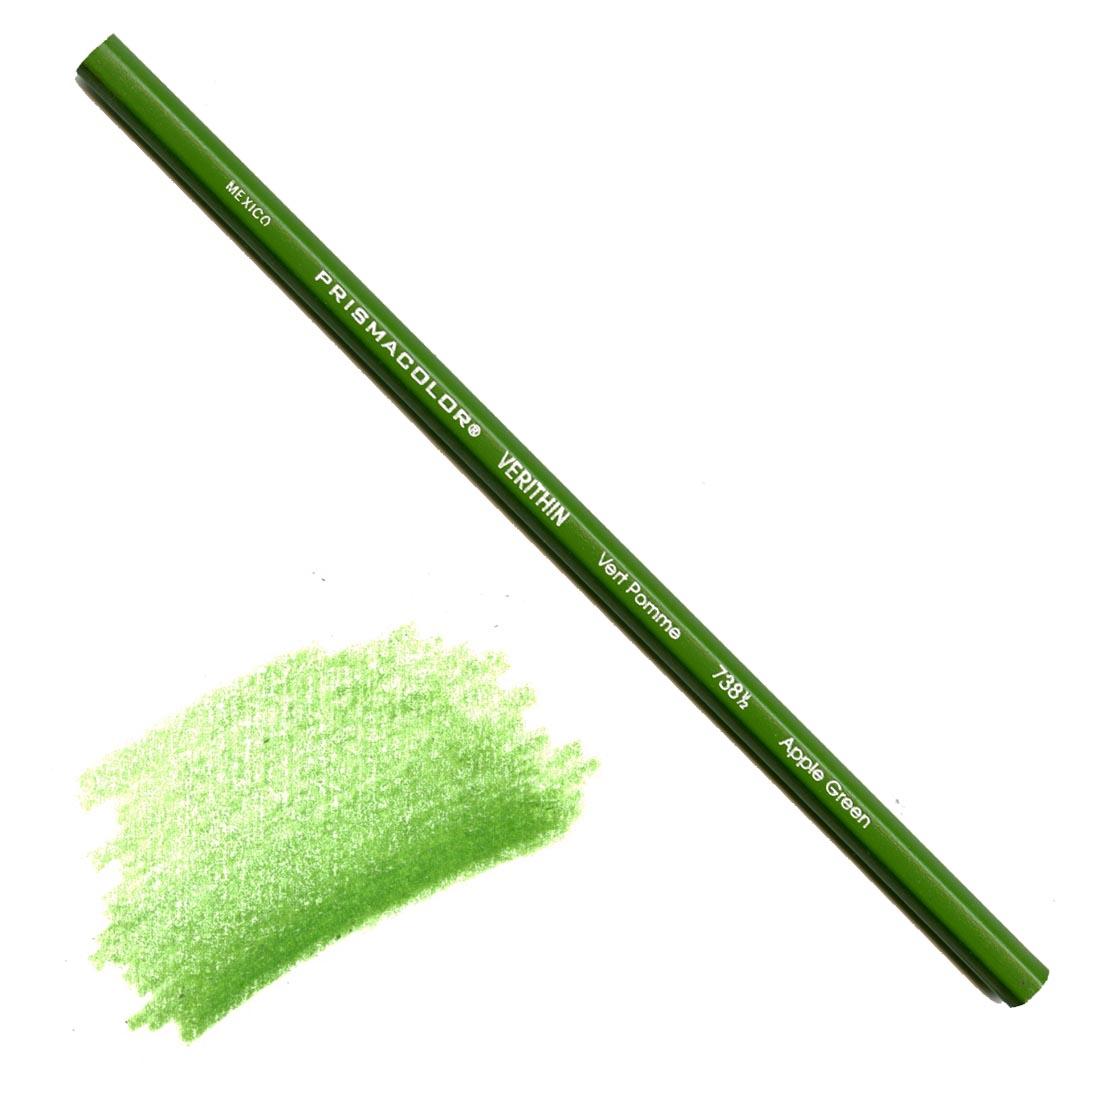 Apple Green Prismacolor Verithin Colored Pencil with a sample colored swatch